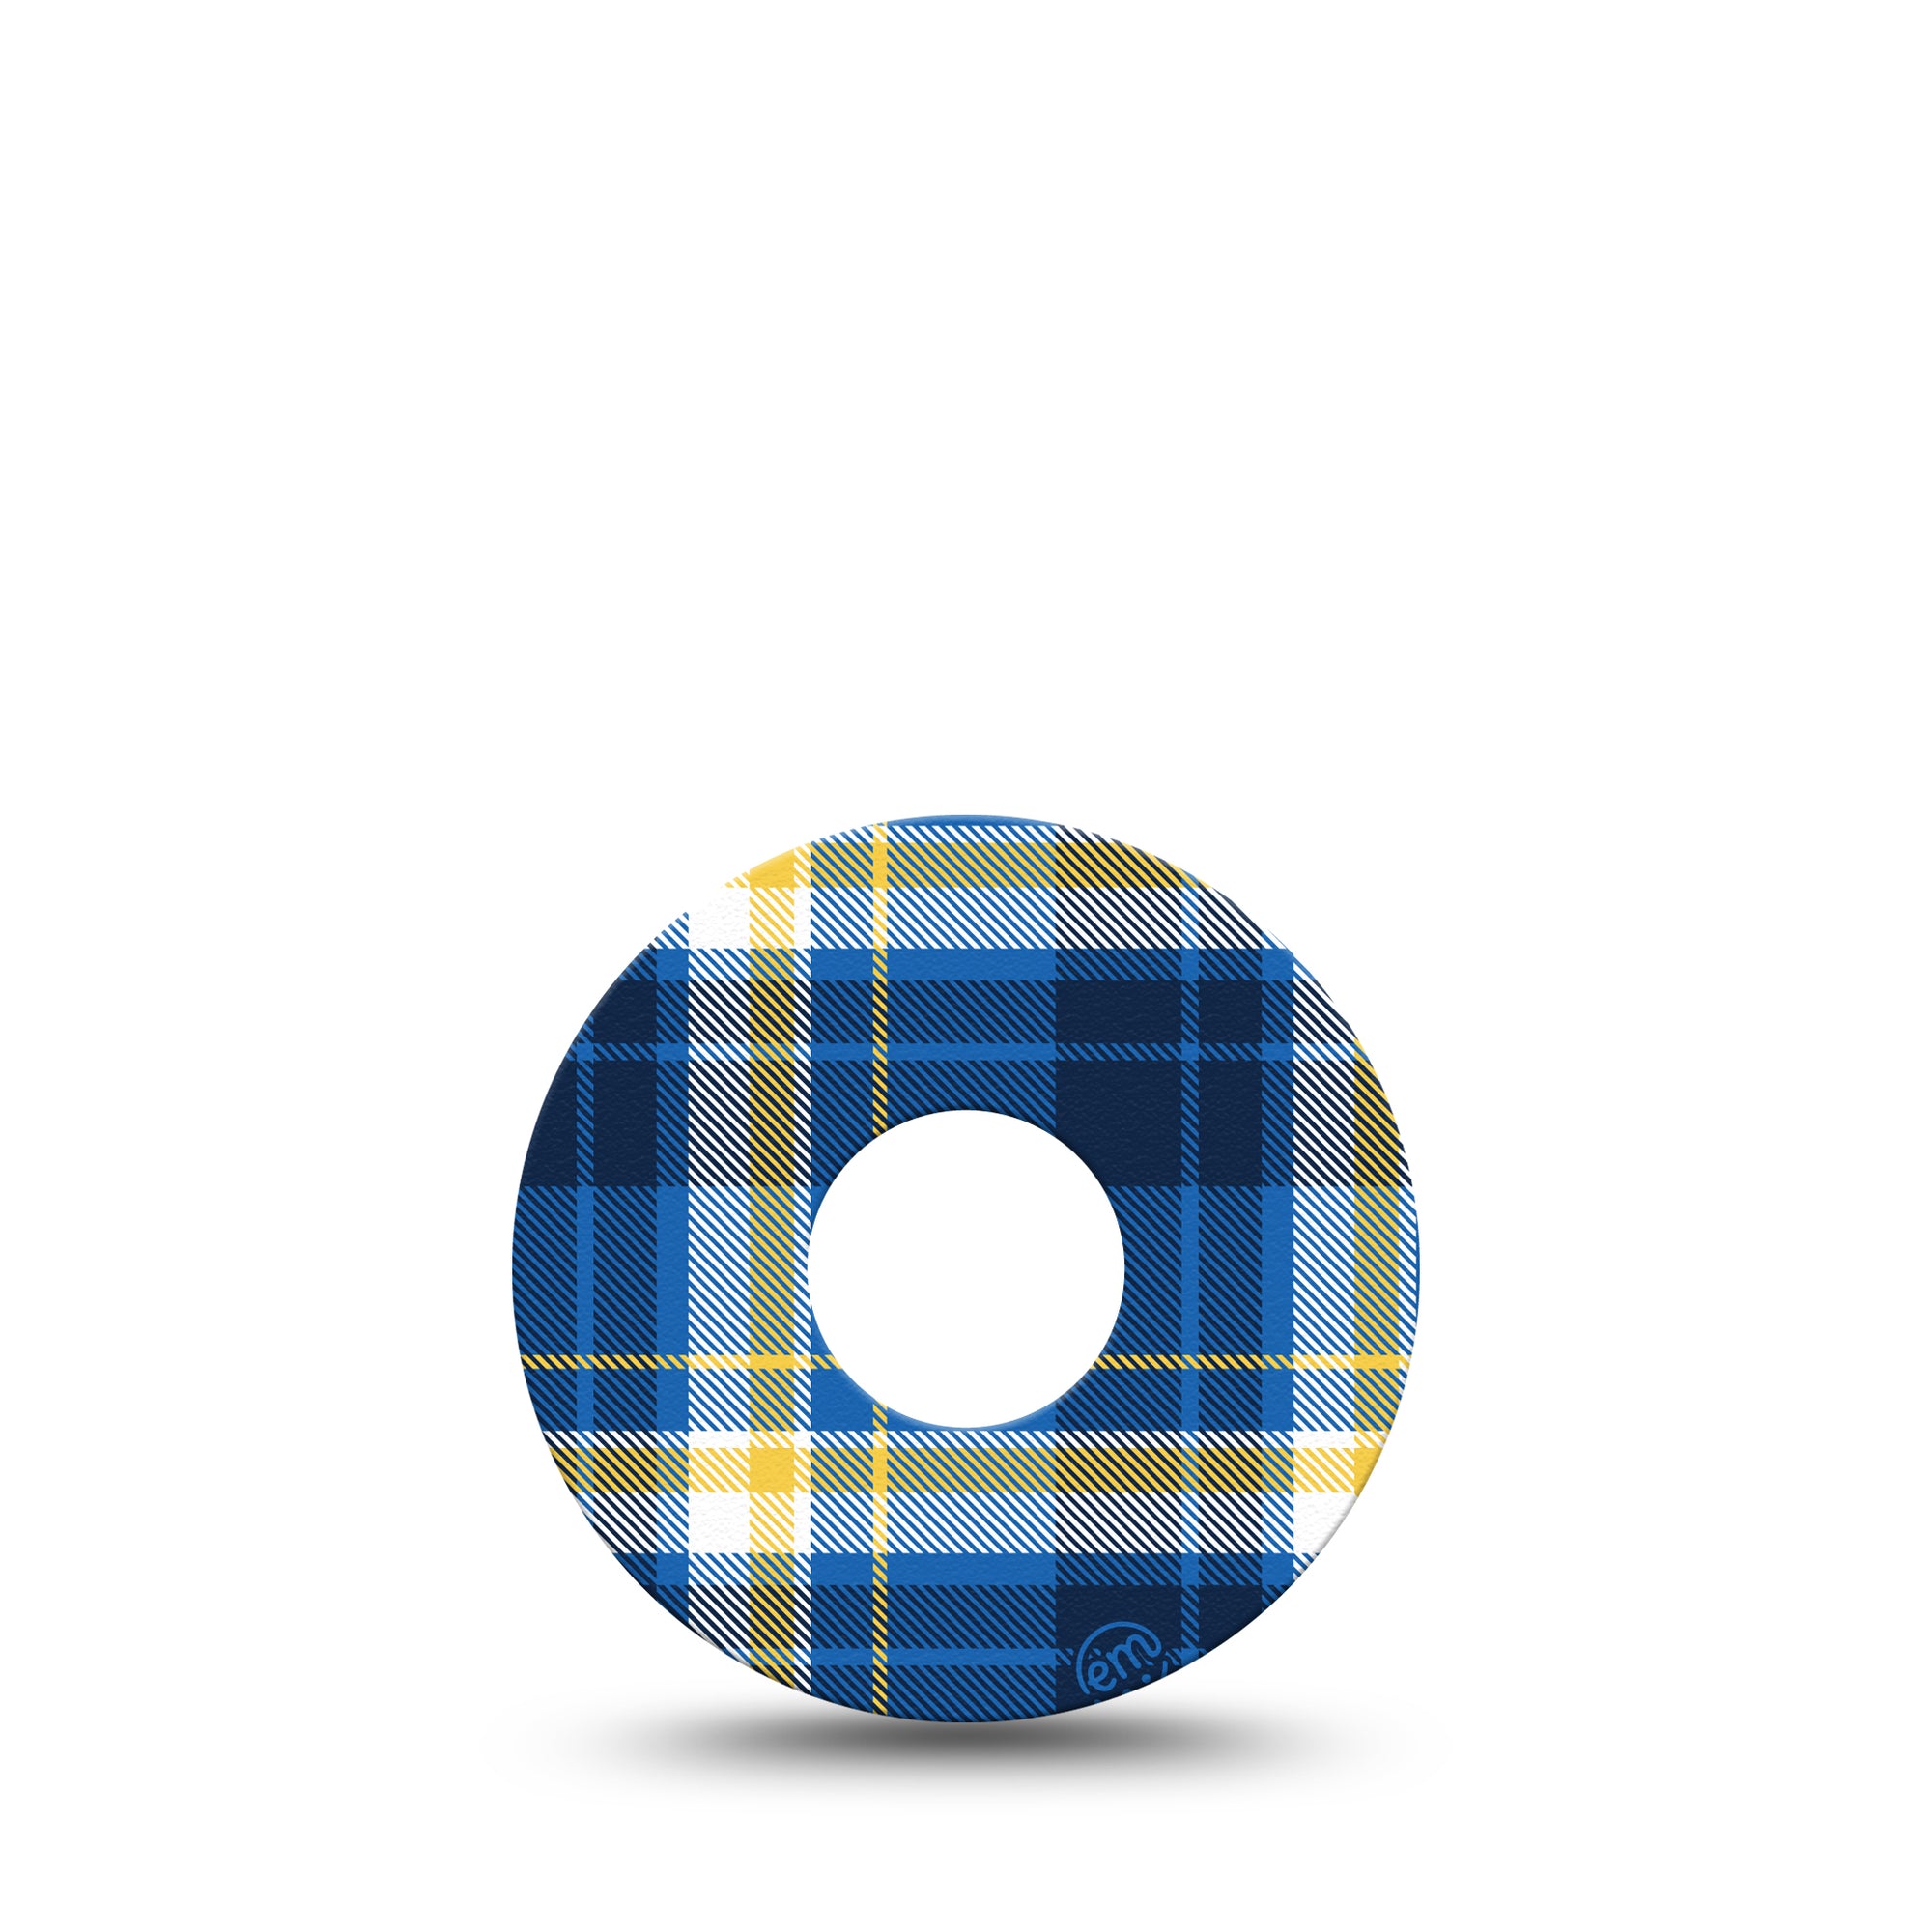 Blue Plaid Libre 3 Tape, Single, Shades of Blue and Yellow Plaid CGM Adhesive Patch Design